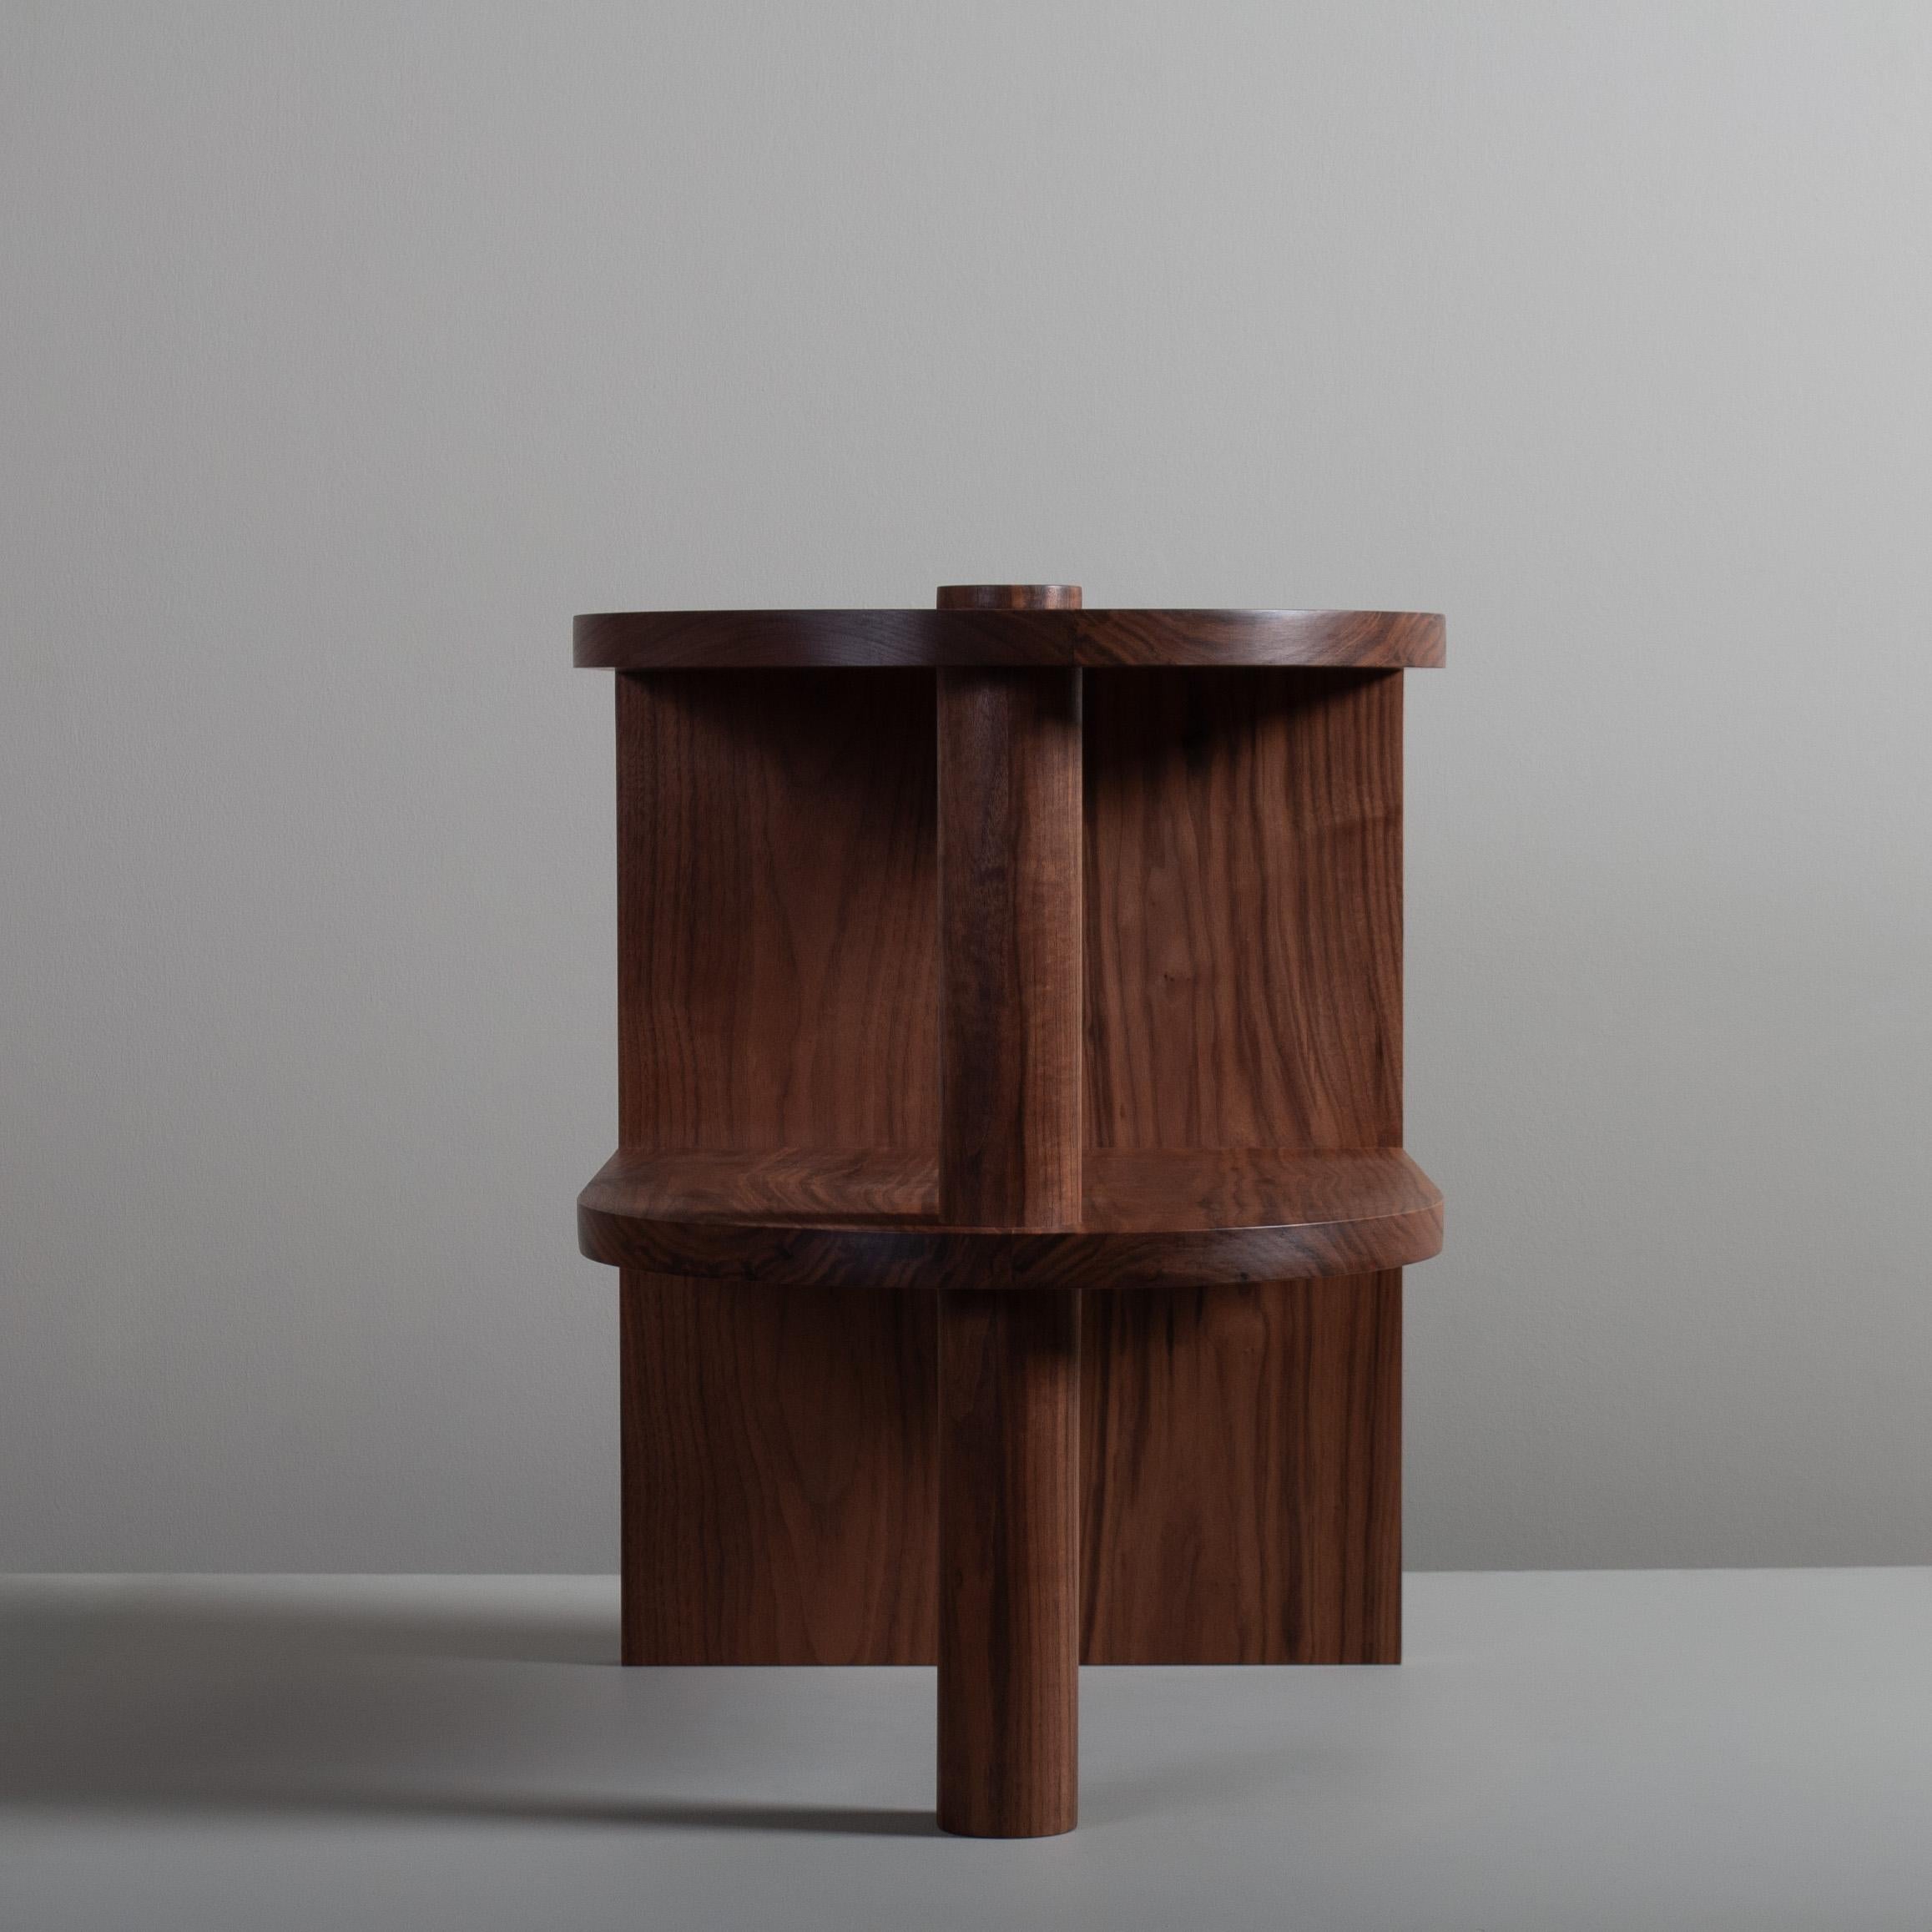 Large handcrafted architectural American black walnut nightstand. Designed by Sum furniture and handcrafted in England using traditional furniture making techniques with the finest American Black Walnut. Hand-cut oversized dovetail jointing detail